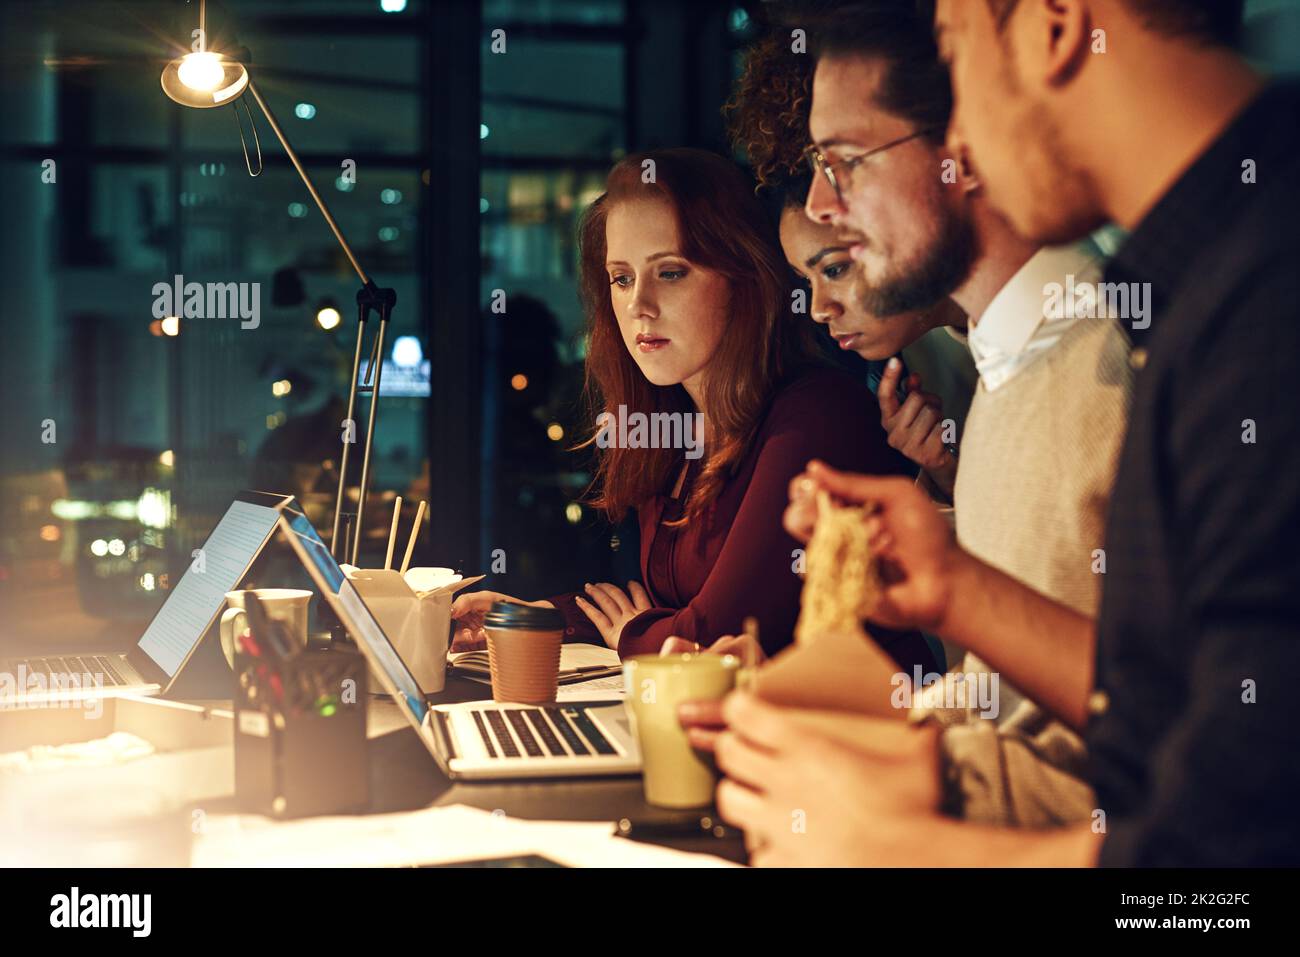 Deadlines wait for no one. Shot of a business team using a laptop together on a night shift at work. Stock Photo